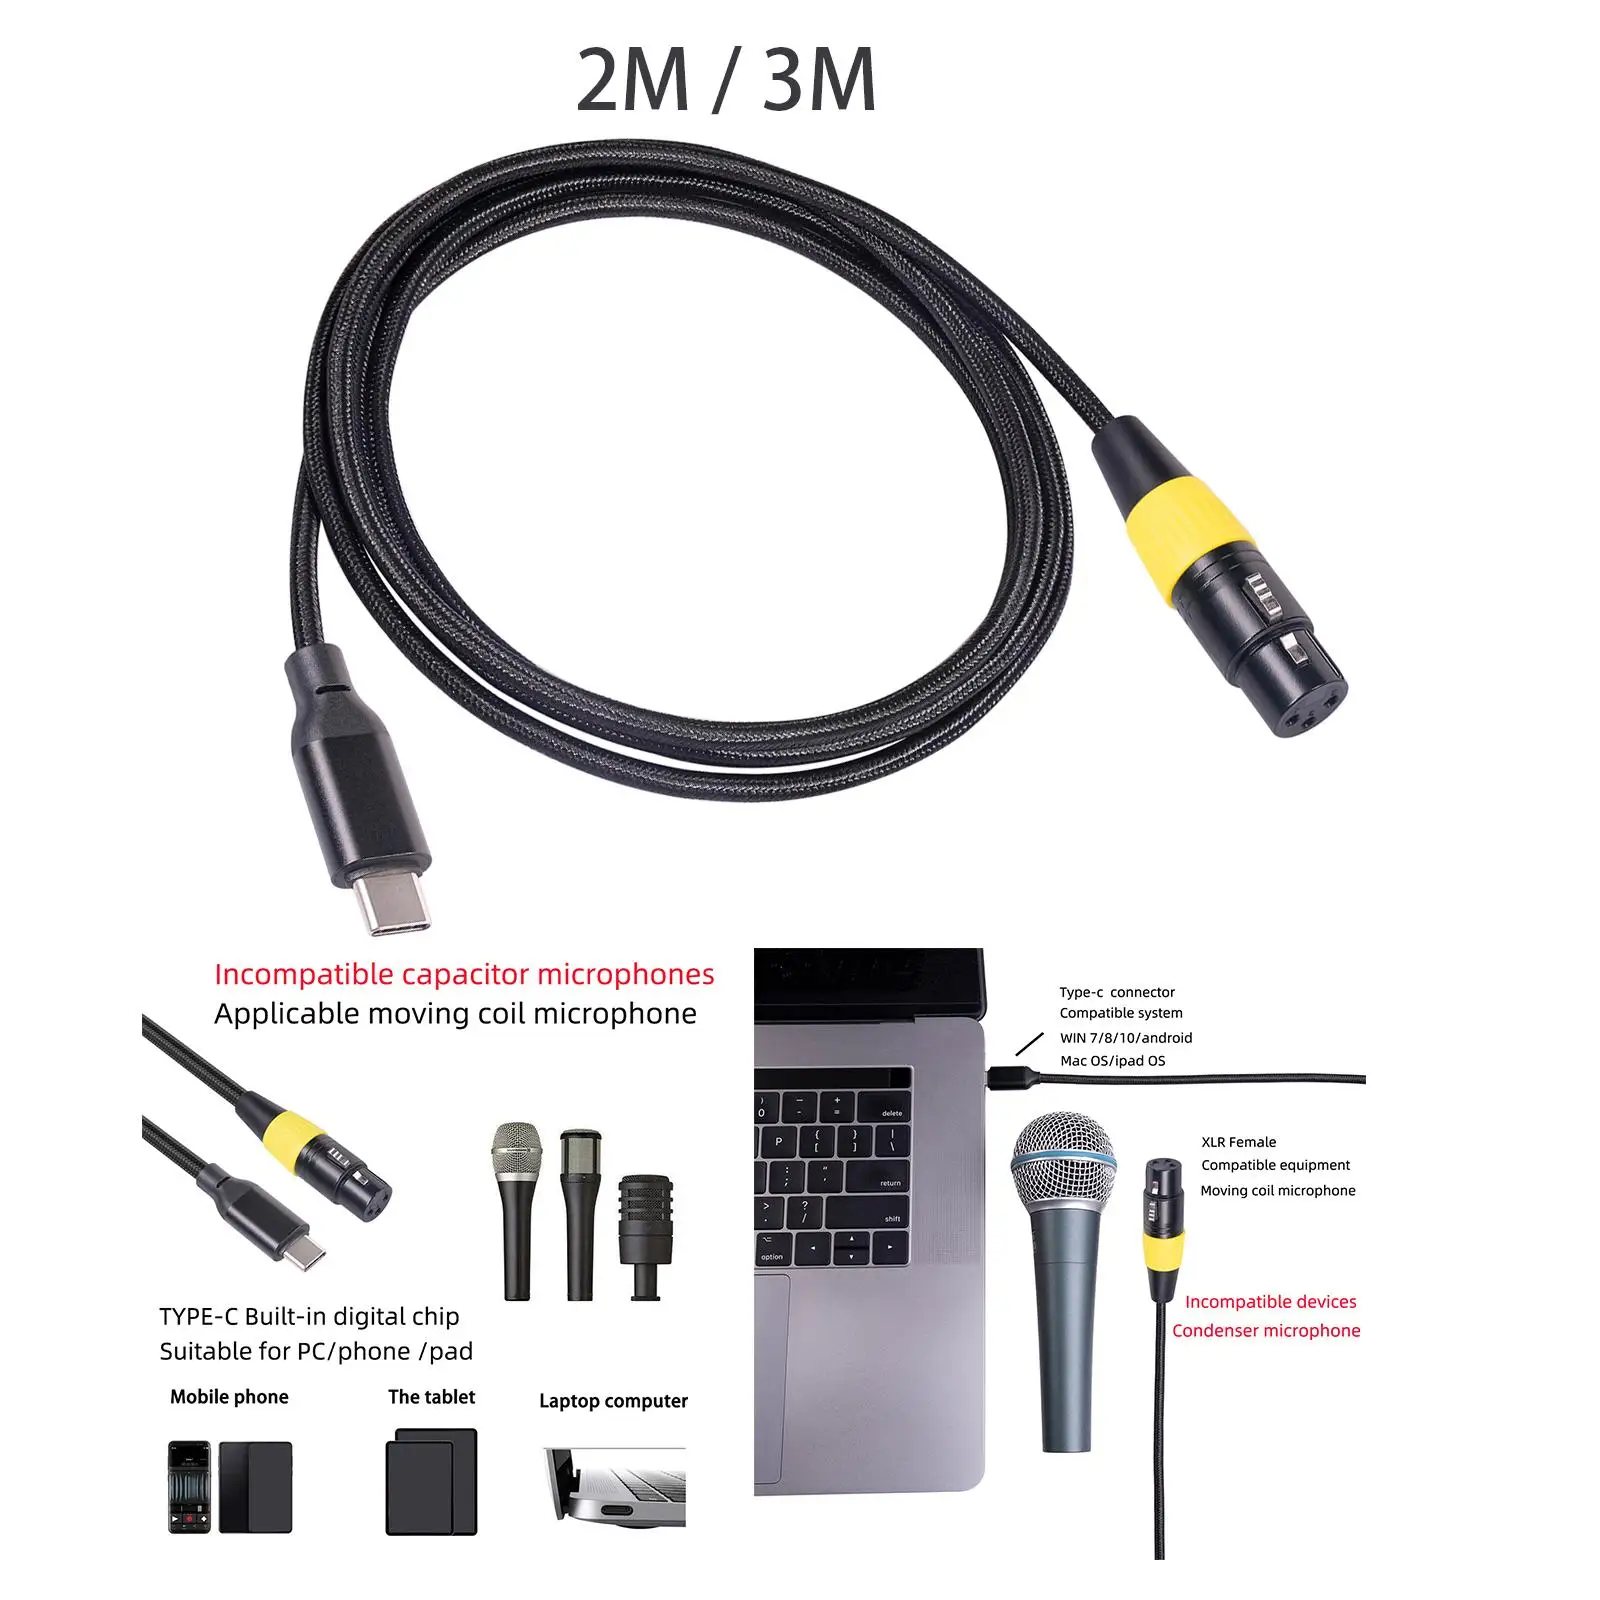 Multifunction XLR Female to USB Microphone Cable Simple to Use Sing Audio Cable Male to Female for Smartphones Computer